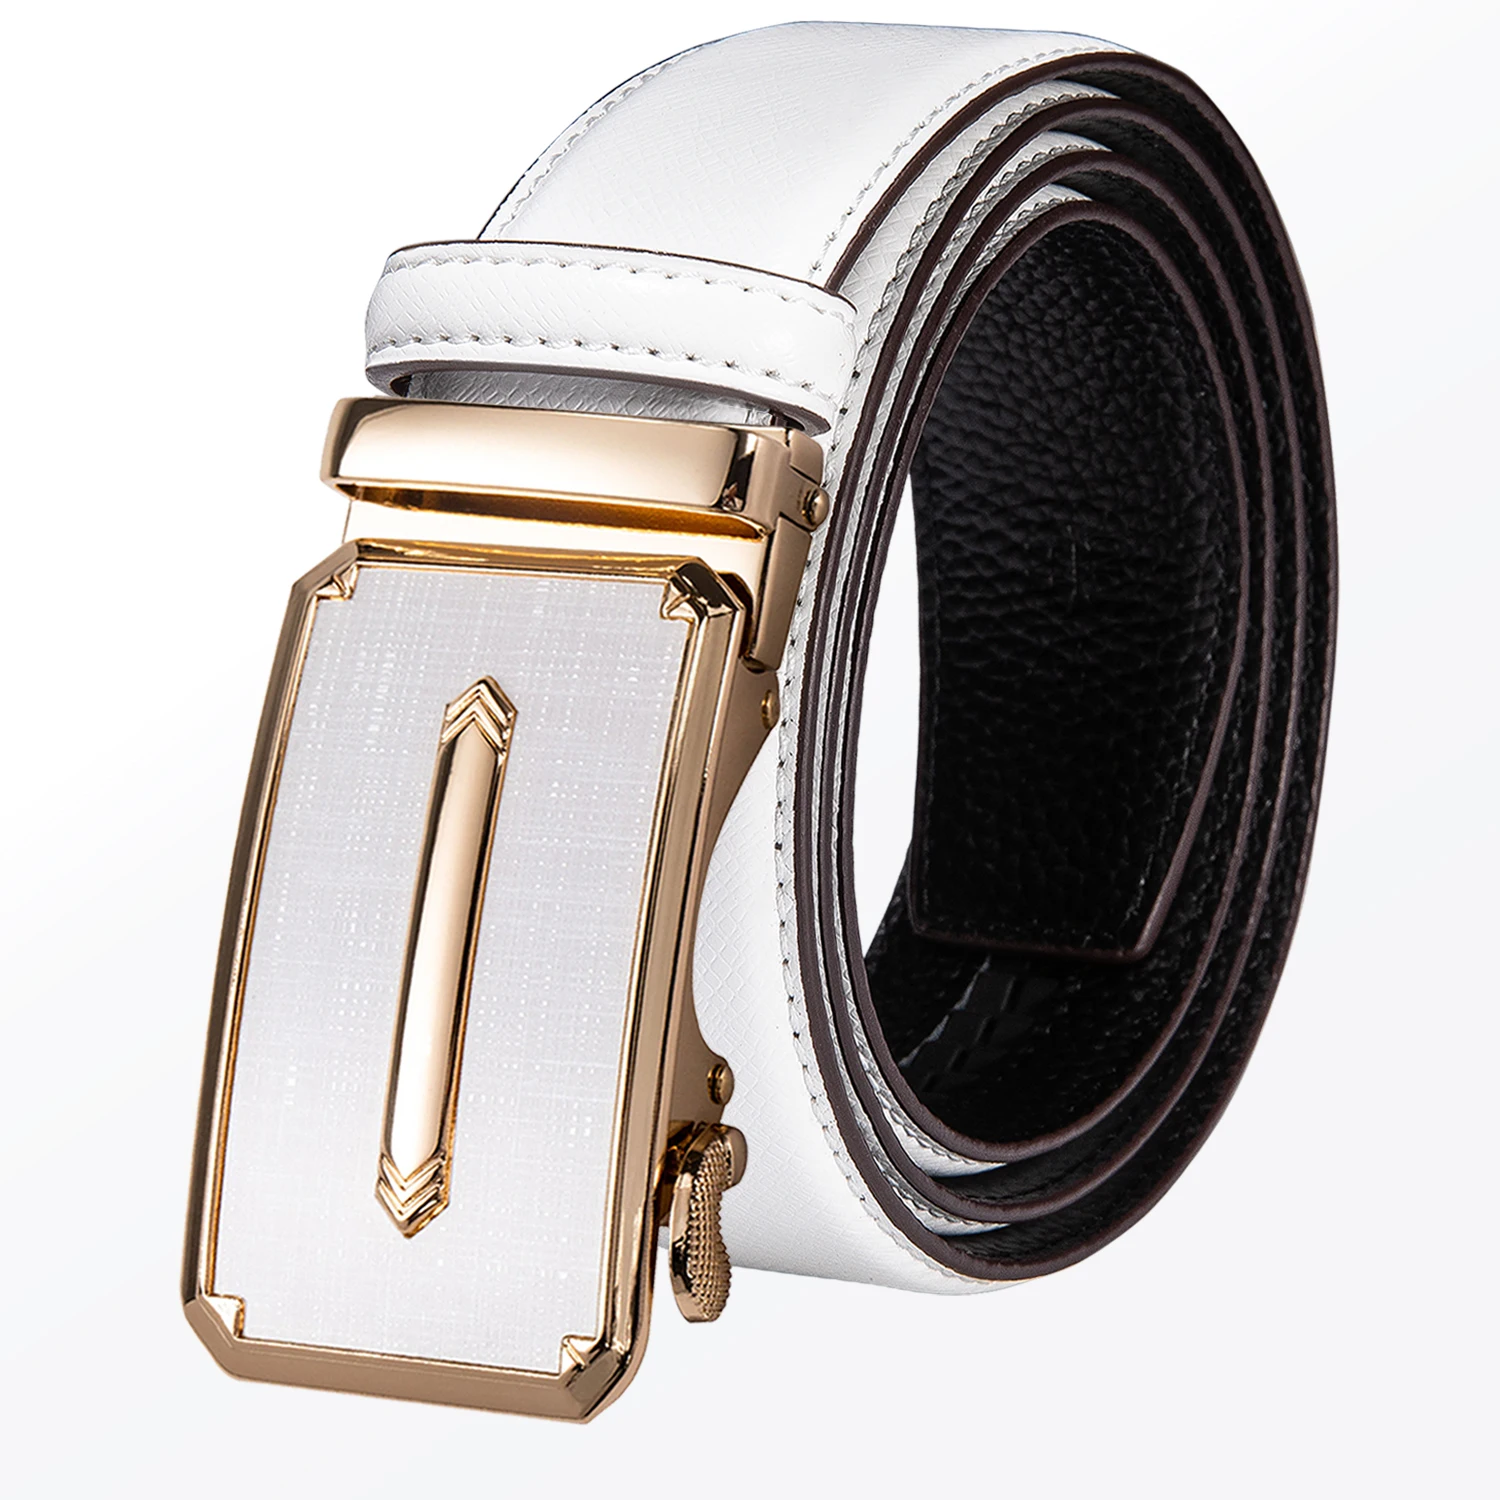 Fashion White Real Leather Mens Belts Metal Automatic Buckles Men Belt Ratchet Waistband Straps for Dress Jeans Wedding Party